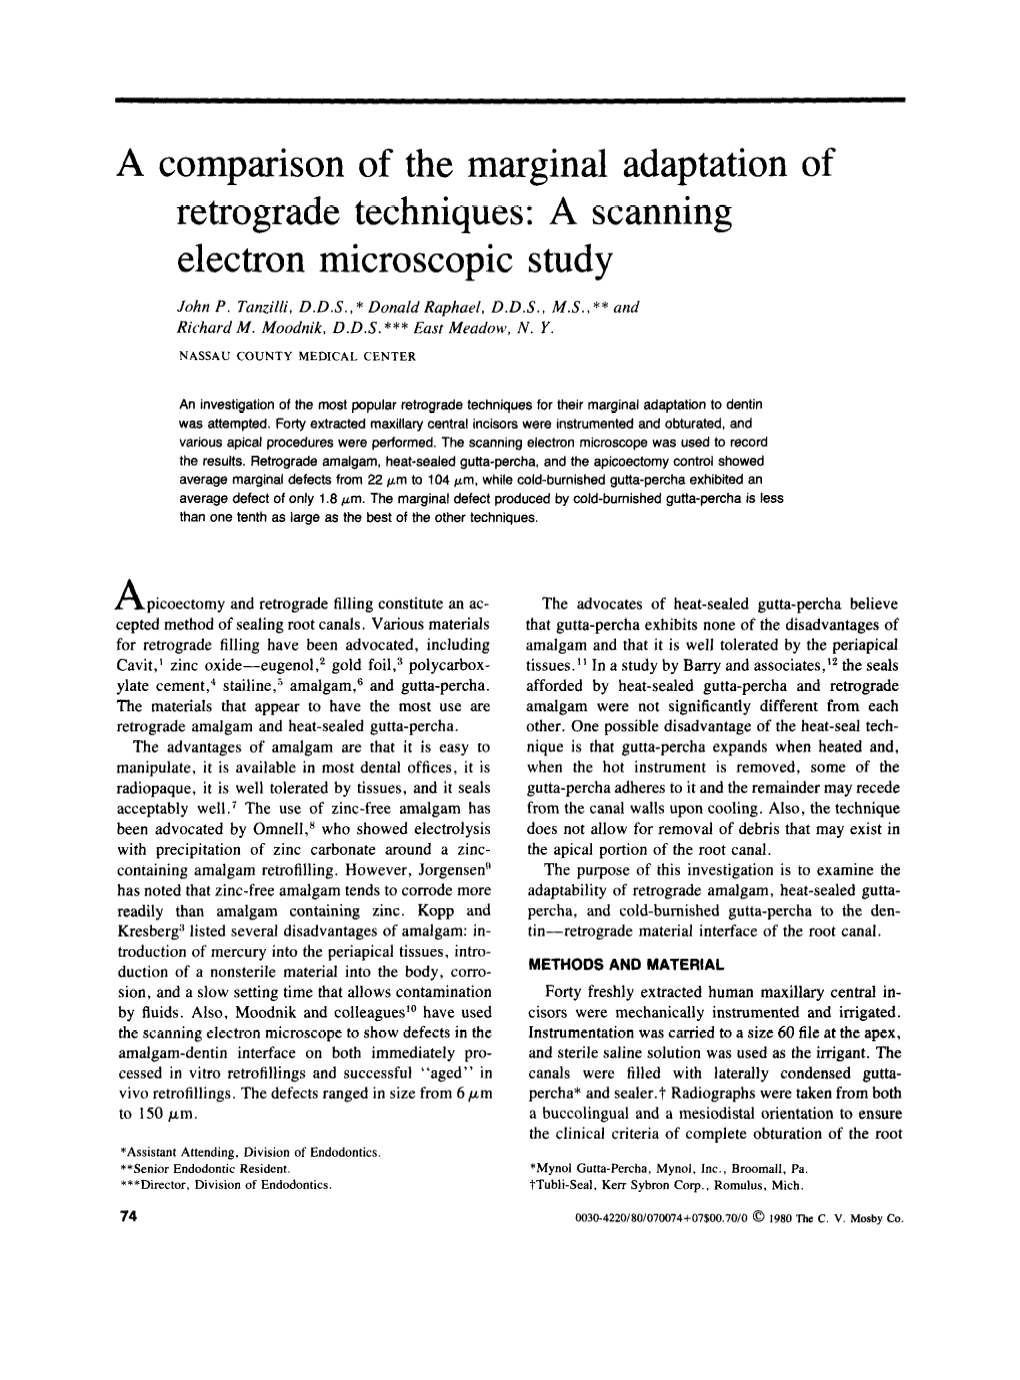 A Comparison of the Marginal Adaptation of Retrograde Techniques: a Scanning Electron Microscopic Study